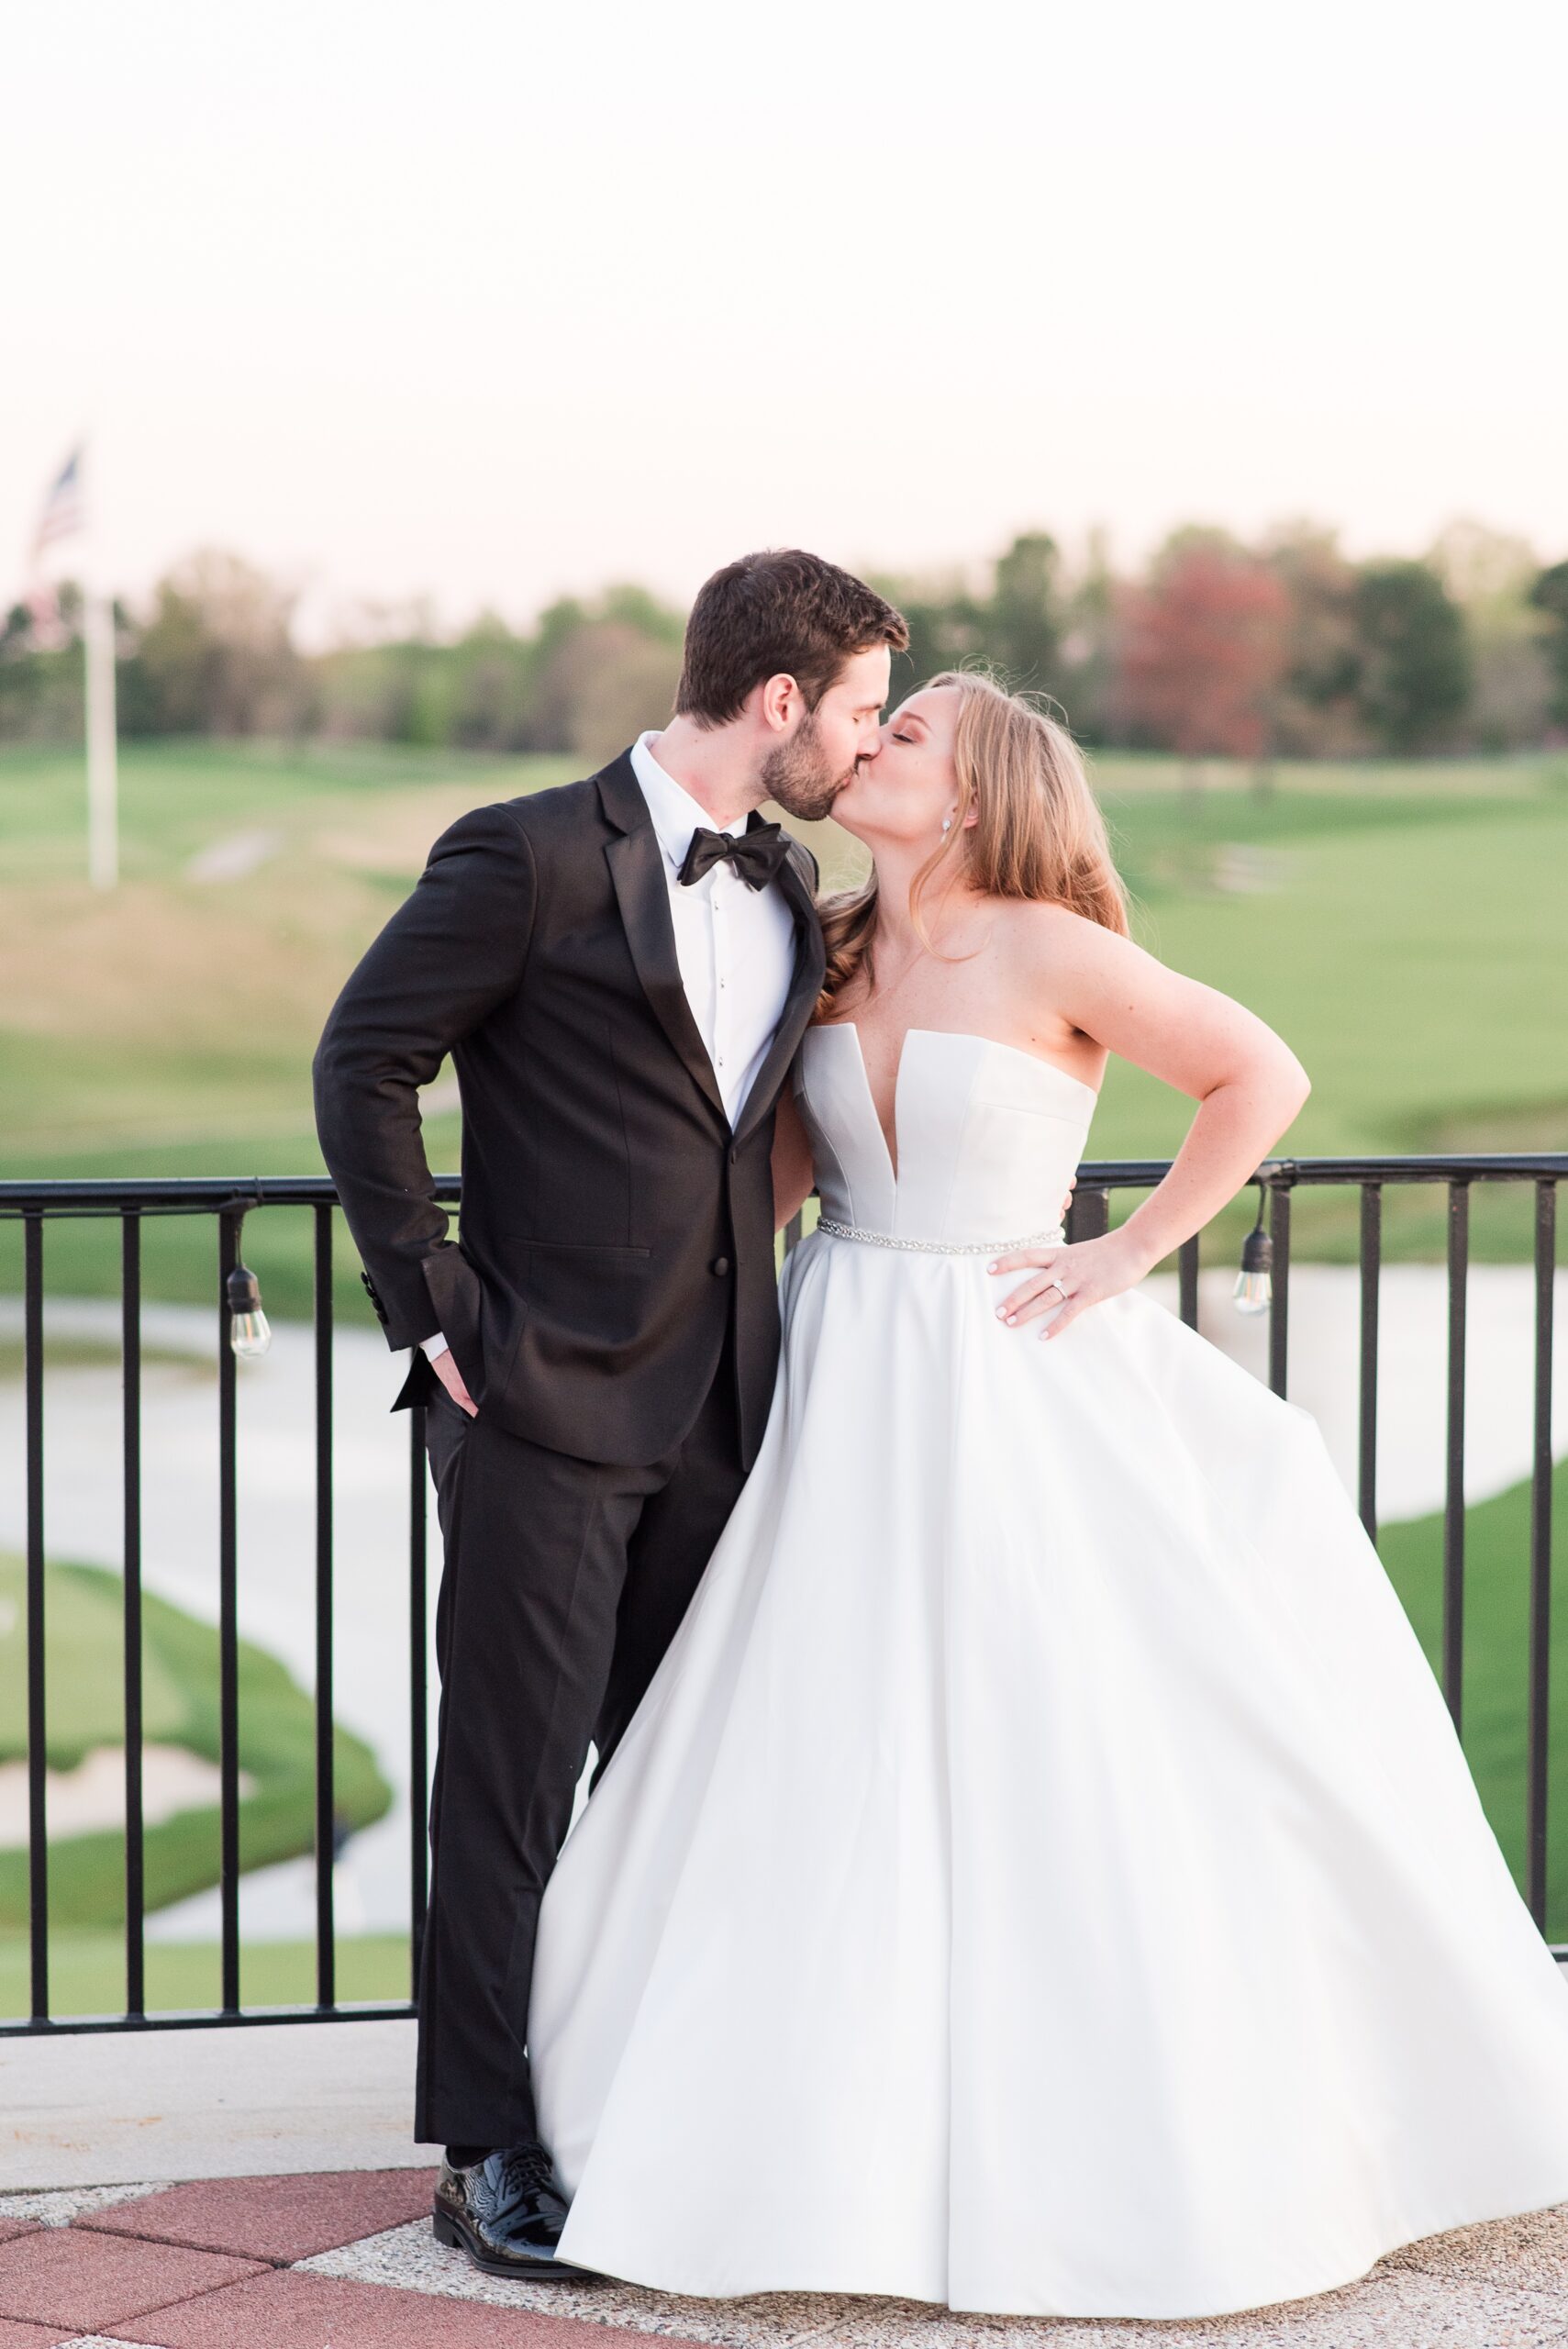 Newlyweds kiss while overlooking the golf course at their Congressional Country Club Wedding